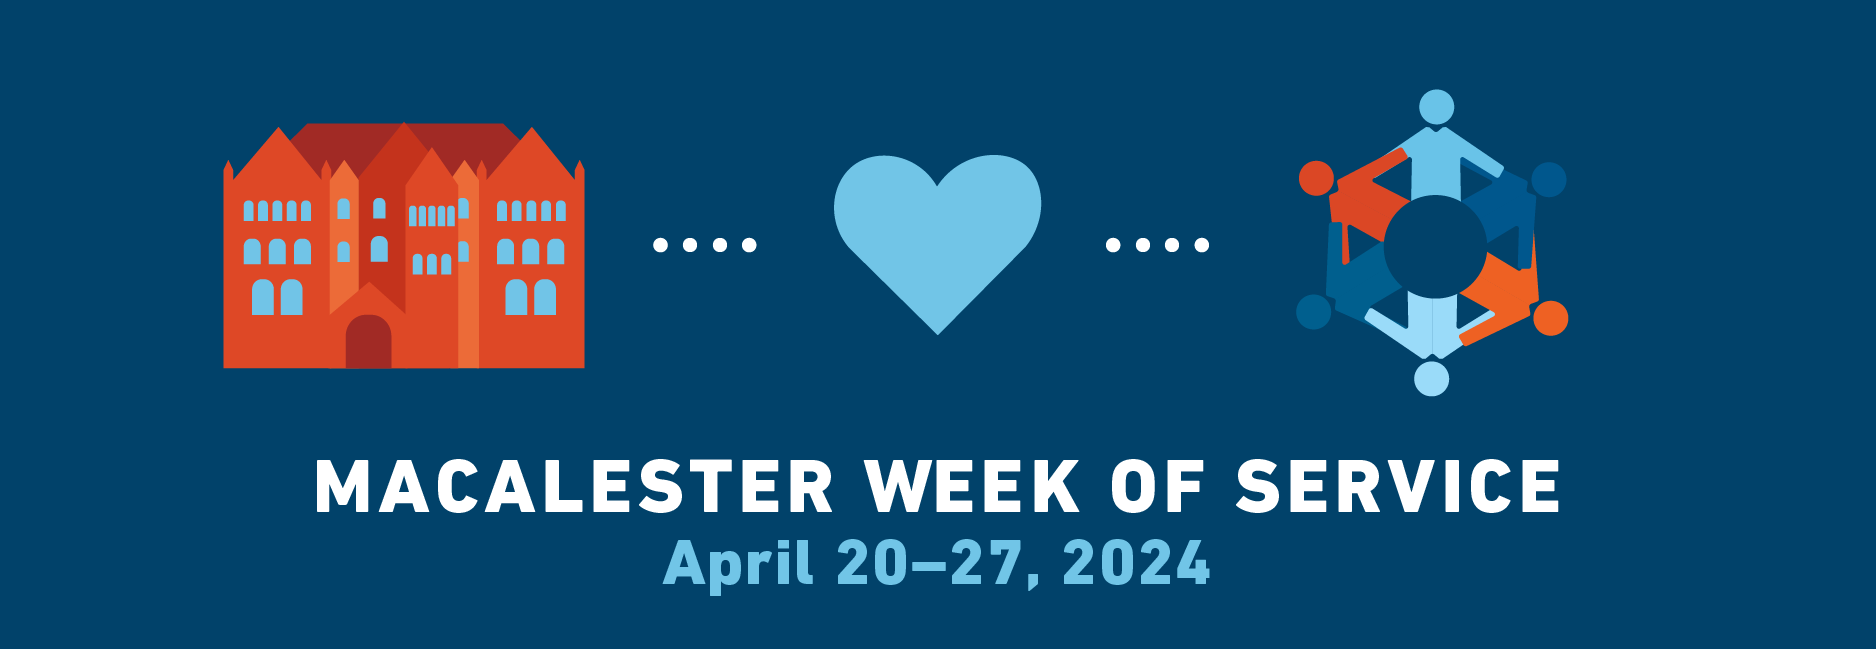 Macalester Week of Service April 20-27, 2024